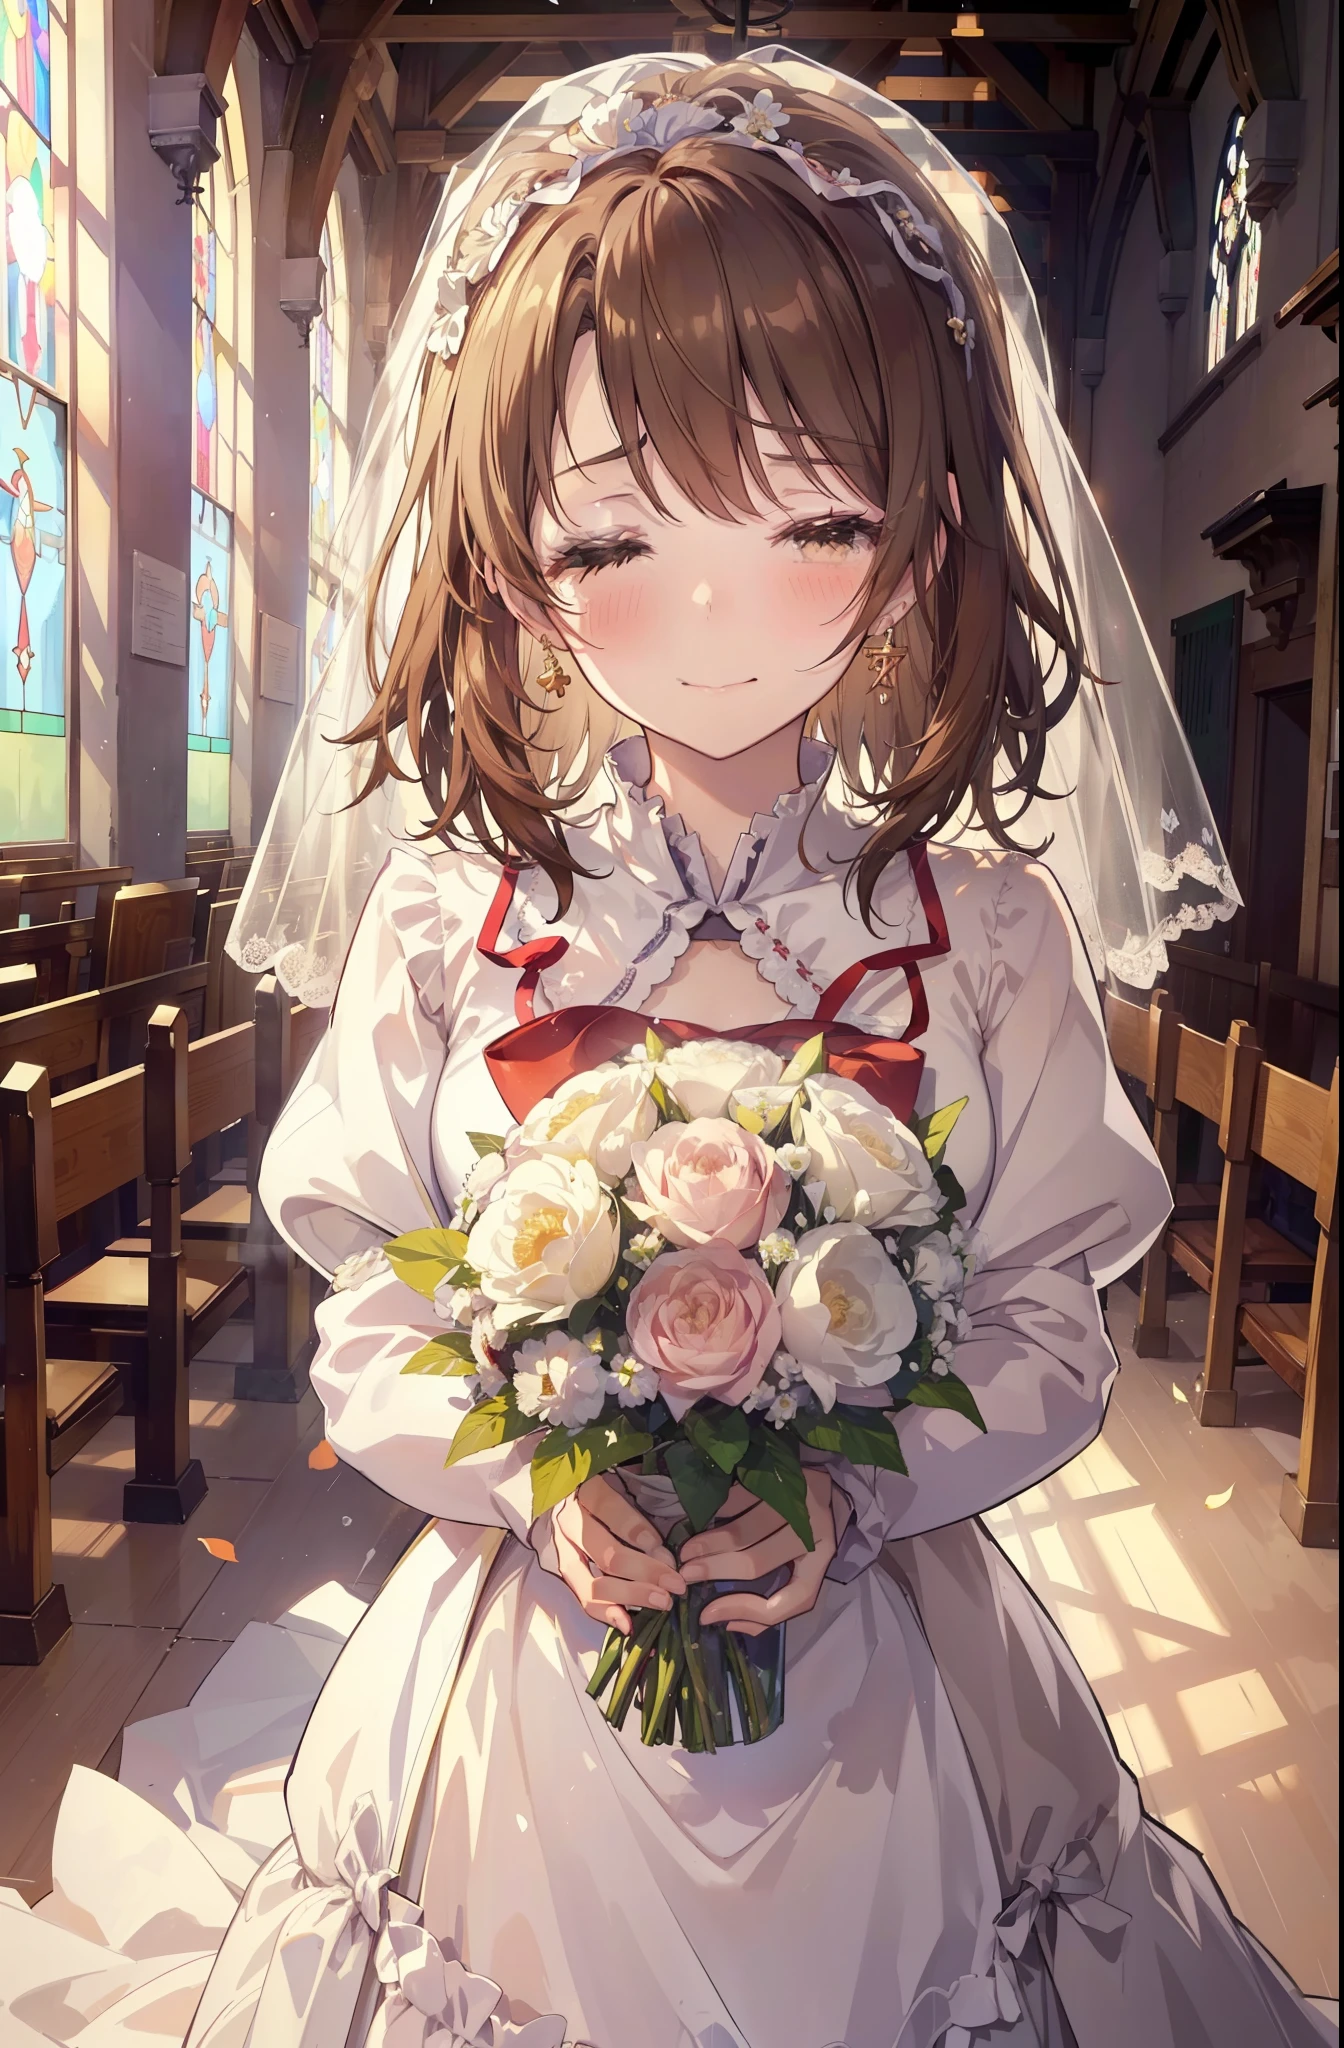 irohaisshiki, iroha isshiki, long hair, brown hair,  open your mouth,smile,happy atmosphere,Please close your eyes and cry,tears run down her face,tears of joy,blush,smile,large pale stained glass,Light of the sun,chapel,marriage,church,Wedding dress,veil,Wedding Skirts,bouquet,bouquetトス,Holding a big bouquet in both hands,happy atmosphere,Hanabubuki,marriage式,　　　　　　　　　　　　　　　　　　　　break indoors, chapel, church,
break (masterpiece:1.2), highest quality, High resolution, unity 8k wallpaper, (shape:0.8), (highly detailed face, perfect lighting, Very detailed CG, (perfect hands, perfect anatomy),